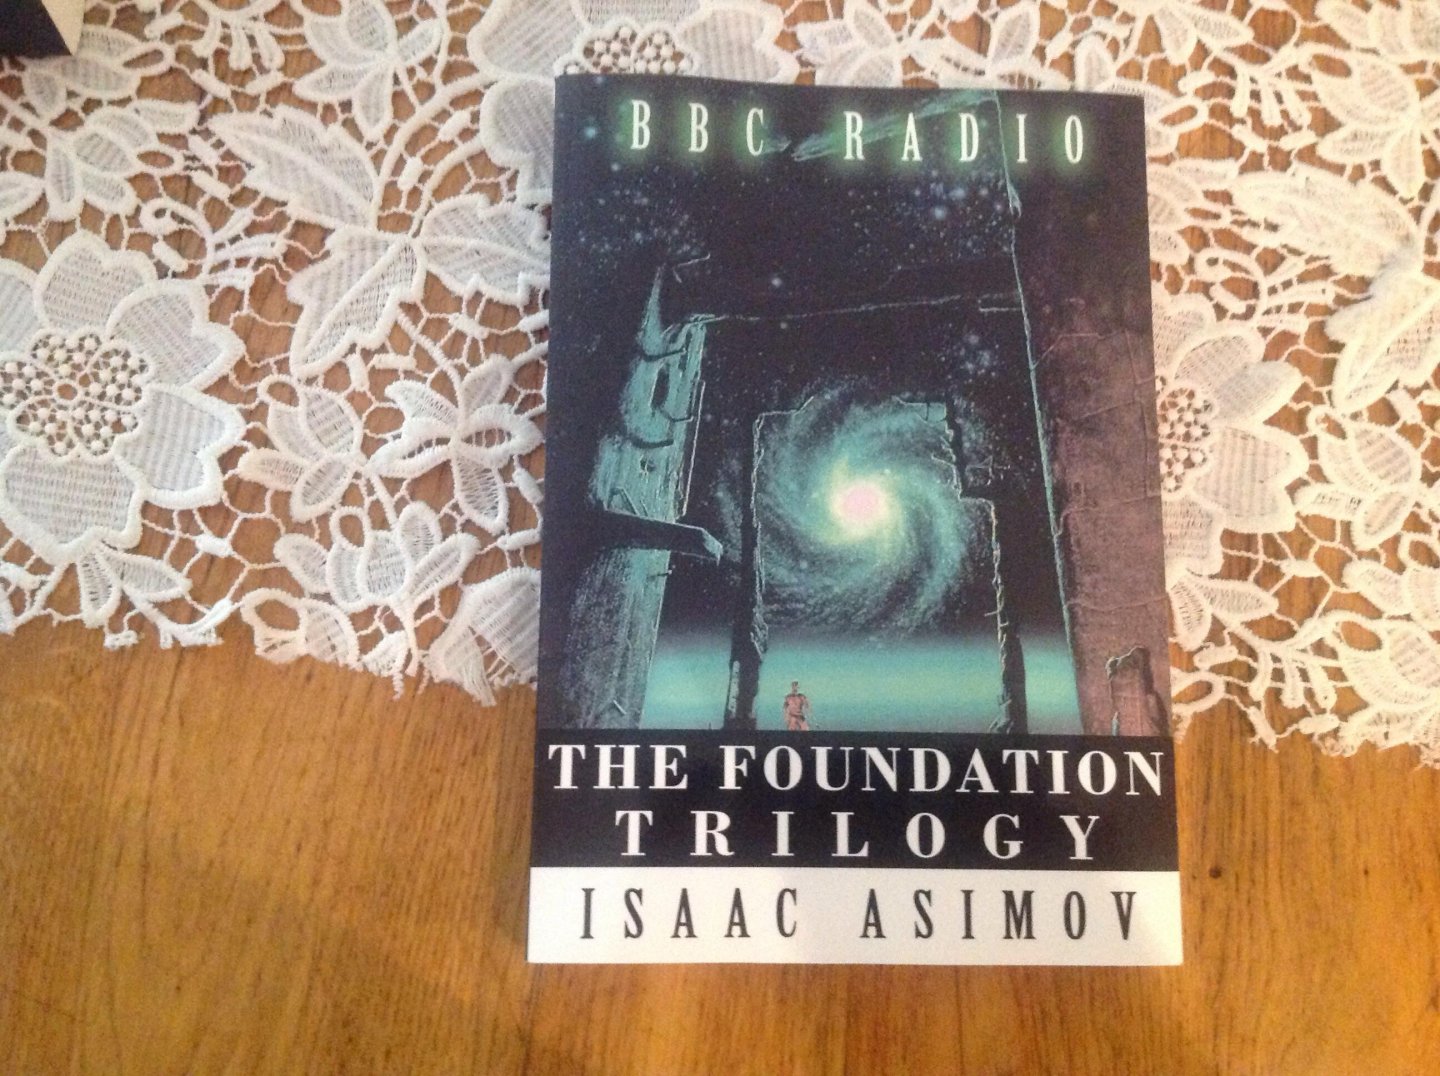 Asimov, Isaac - The Foundation Trilogy (Adapted by BBC Radio)